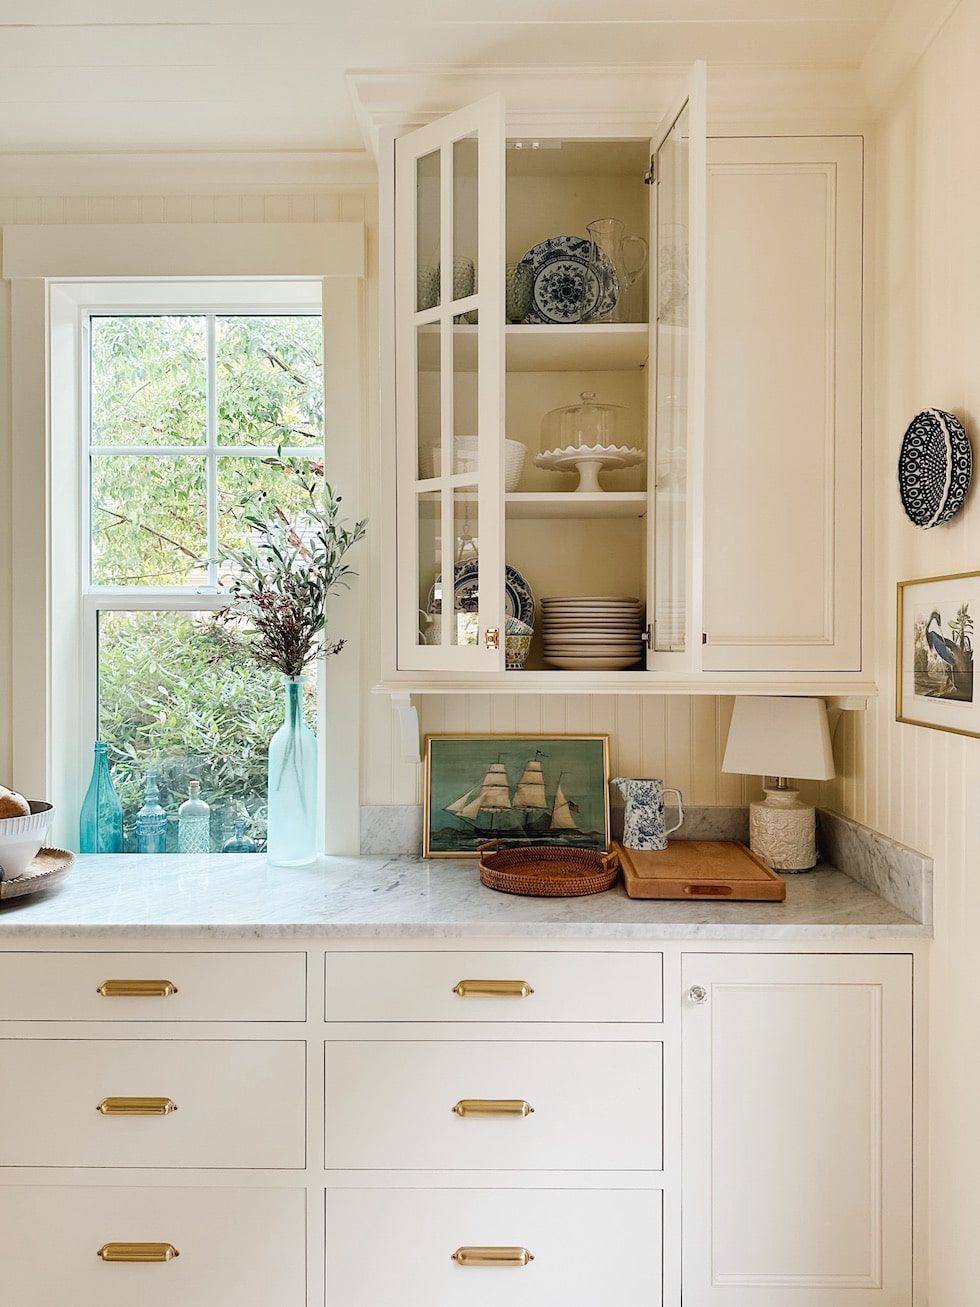 A big reveal...plus a peek at how I'm styling my glass kitchen cabinets!